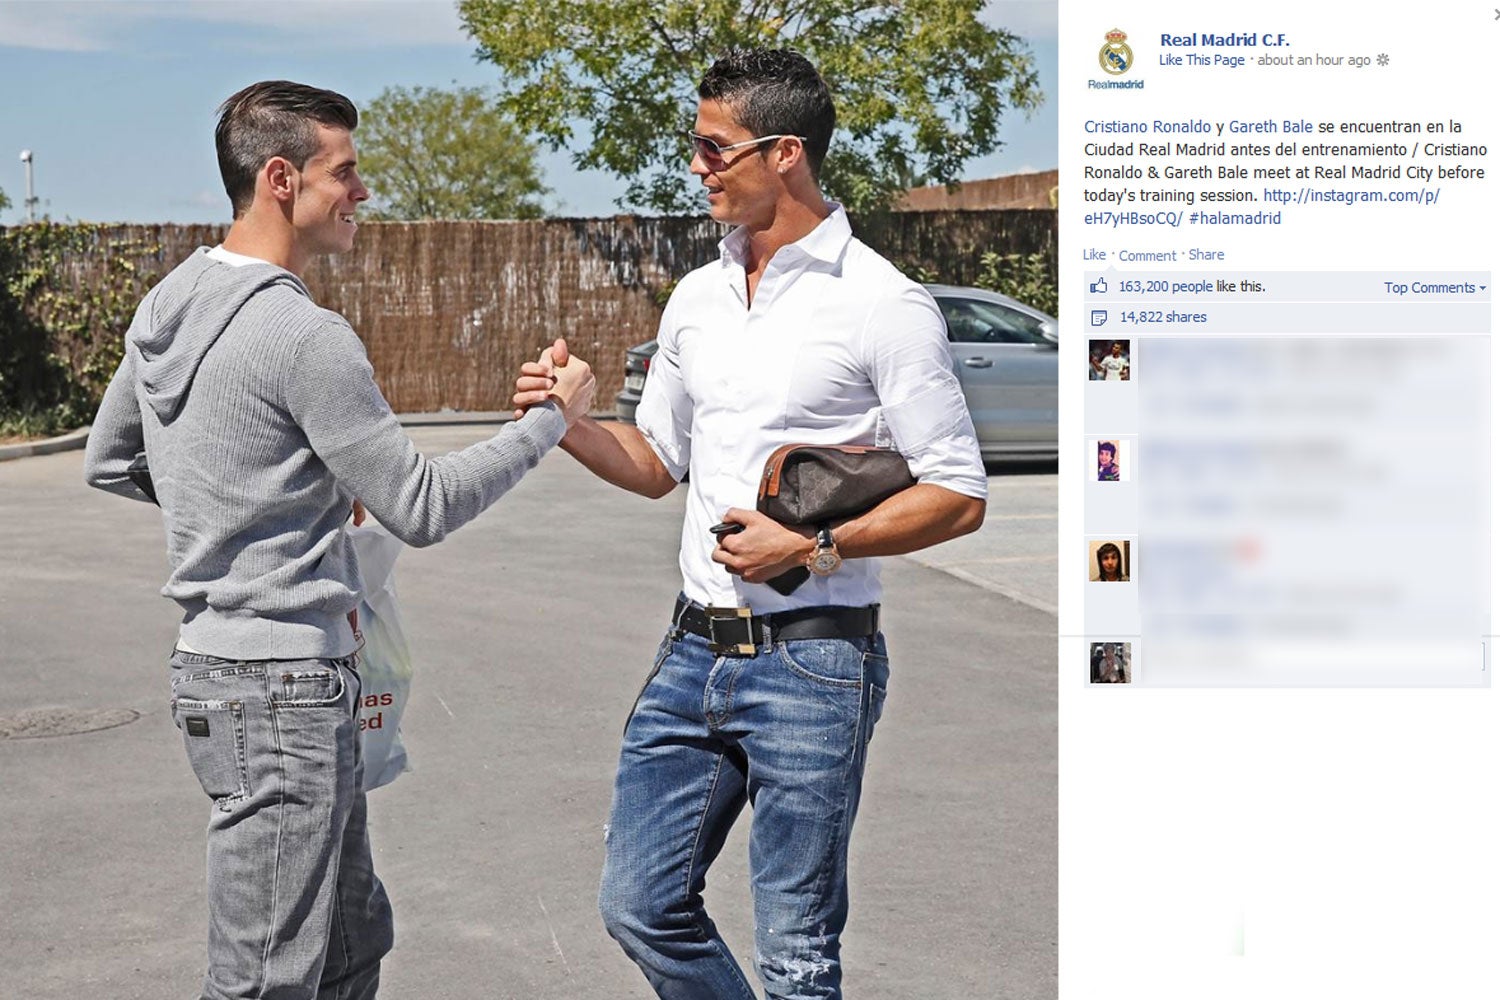 Gareth Bale and Cristiano Ronaldo pictured meeting at Real Madrid